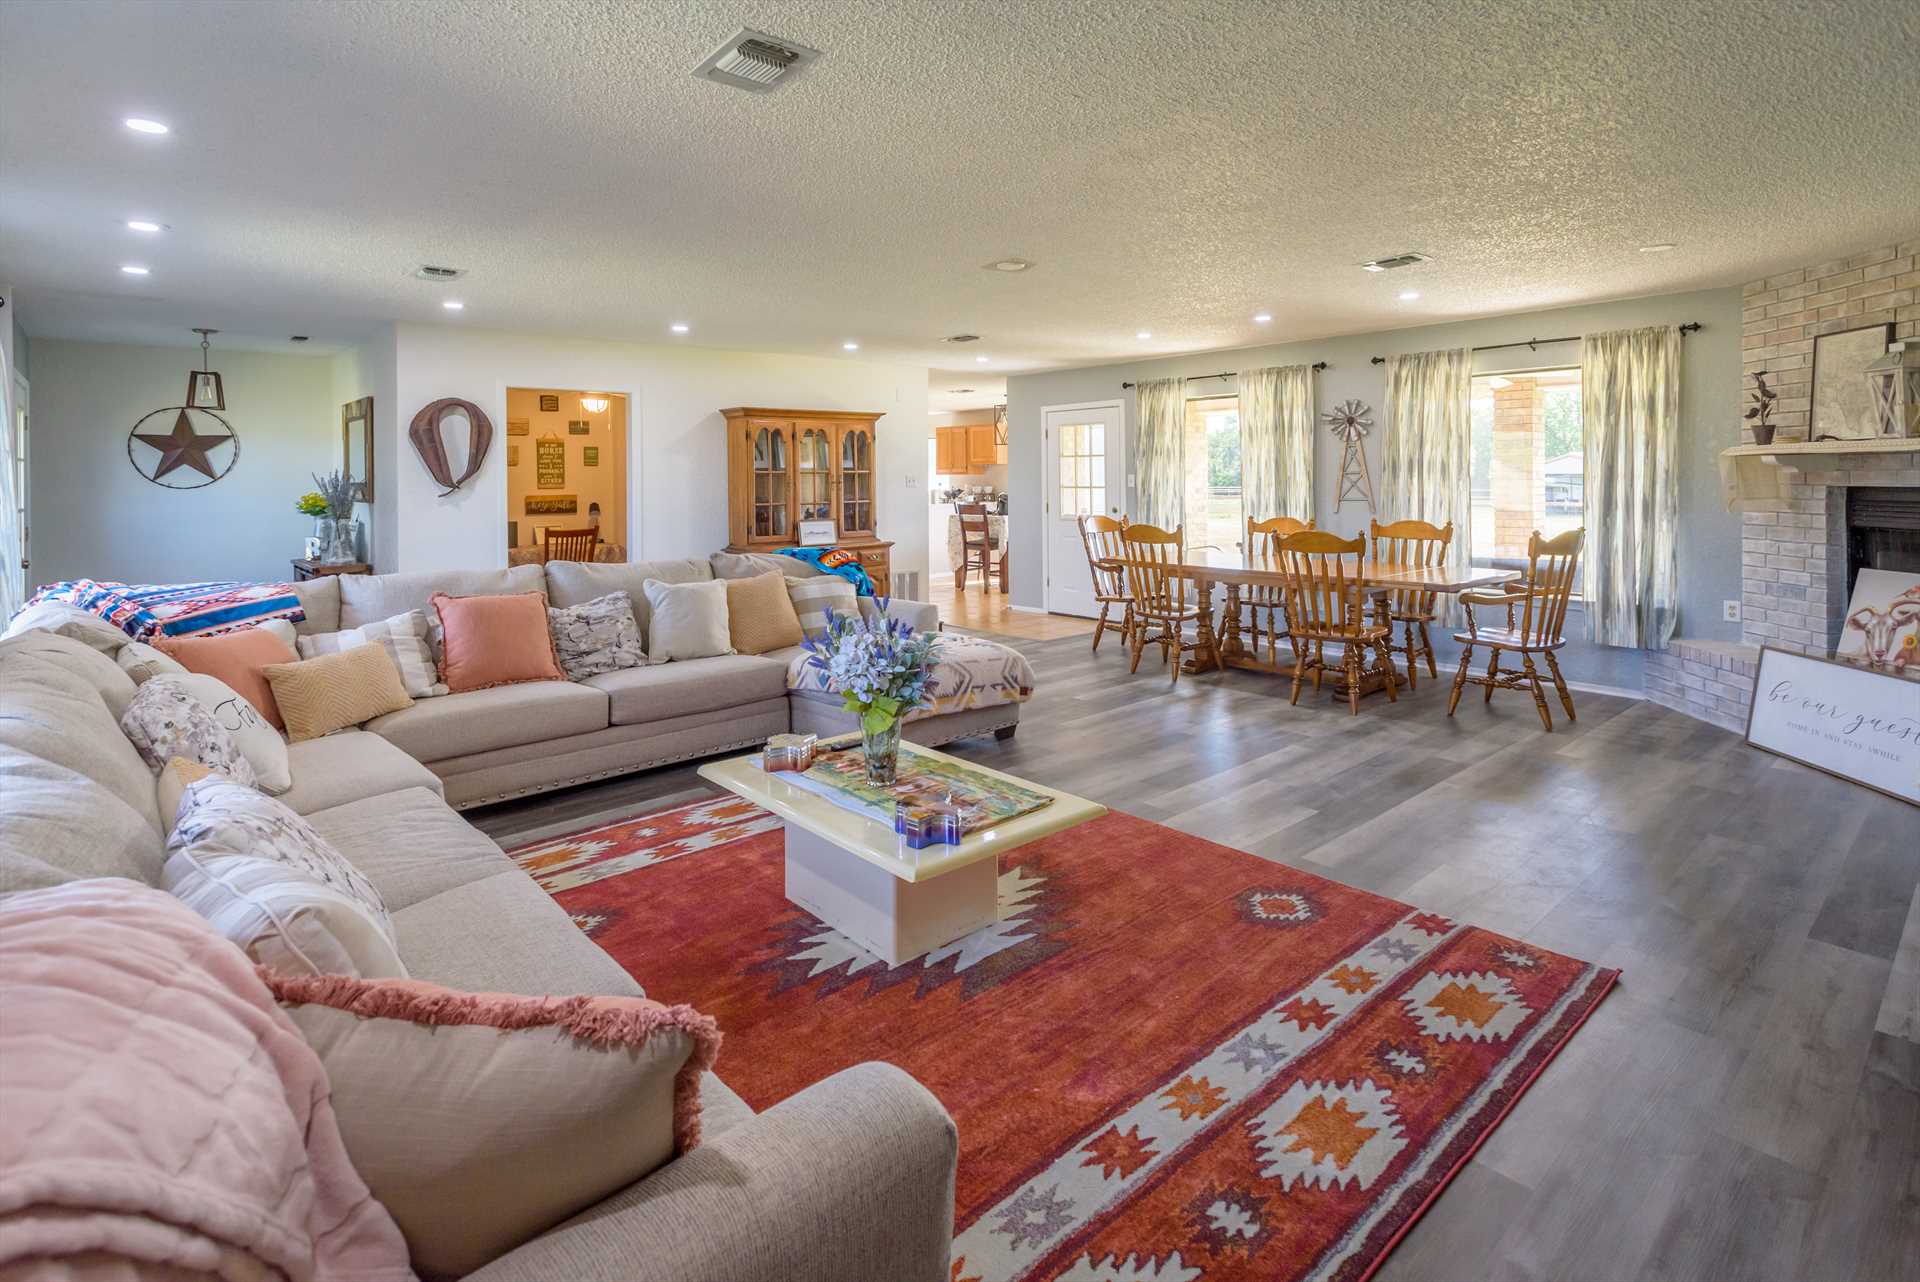                                                 The enormous sectional in the living area, along with a big and roomy dining area, provide plenty of seating in the heart of the wide-open floor plan.